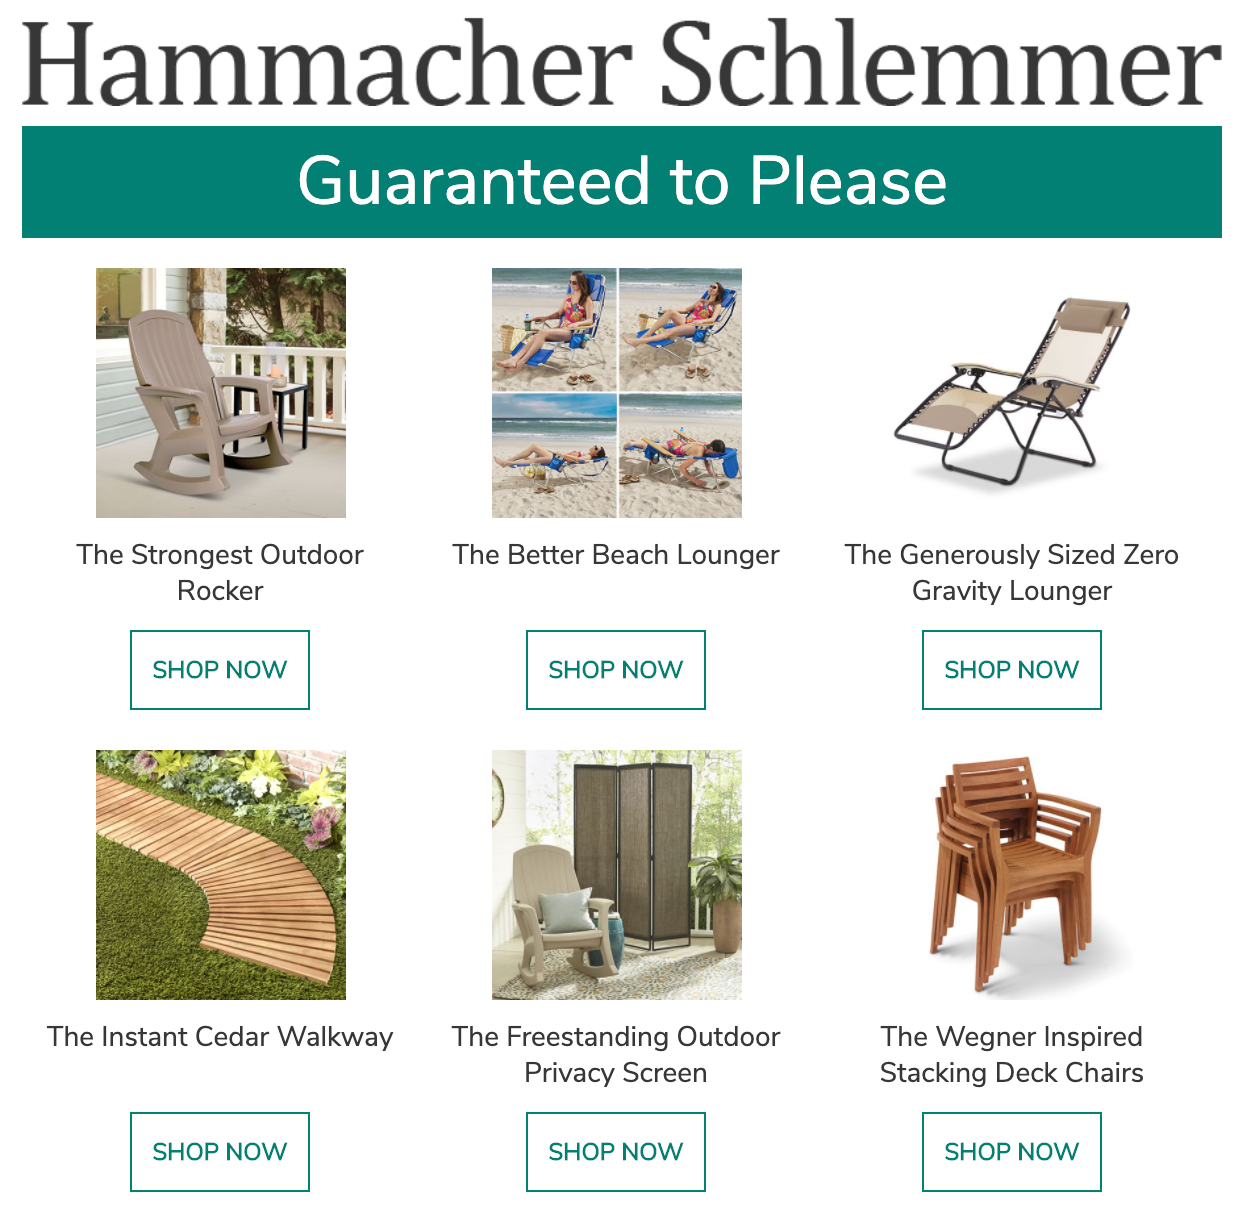 Hammacher Schlemmer personalized product recommendations for chairs